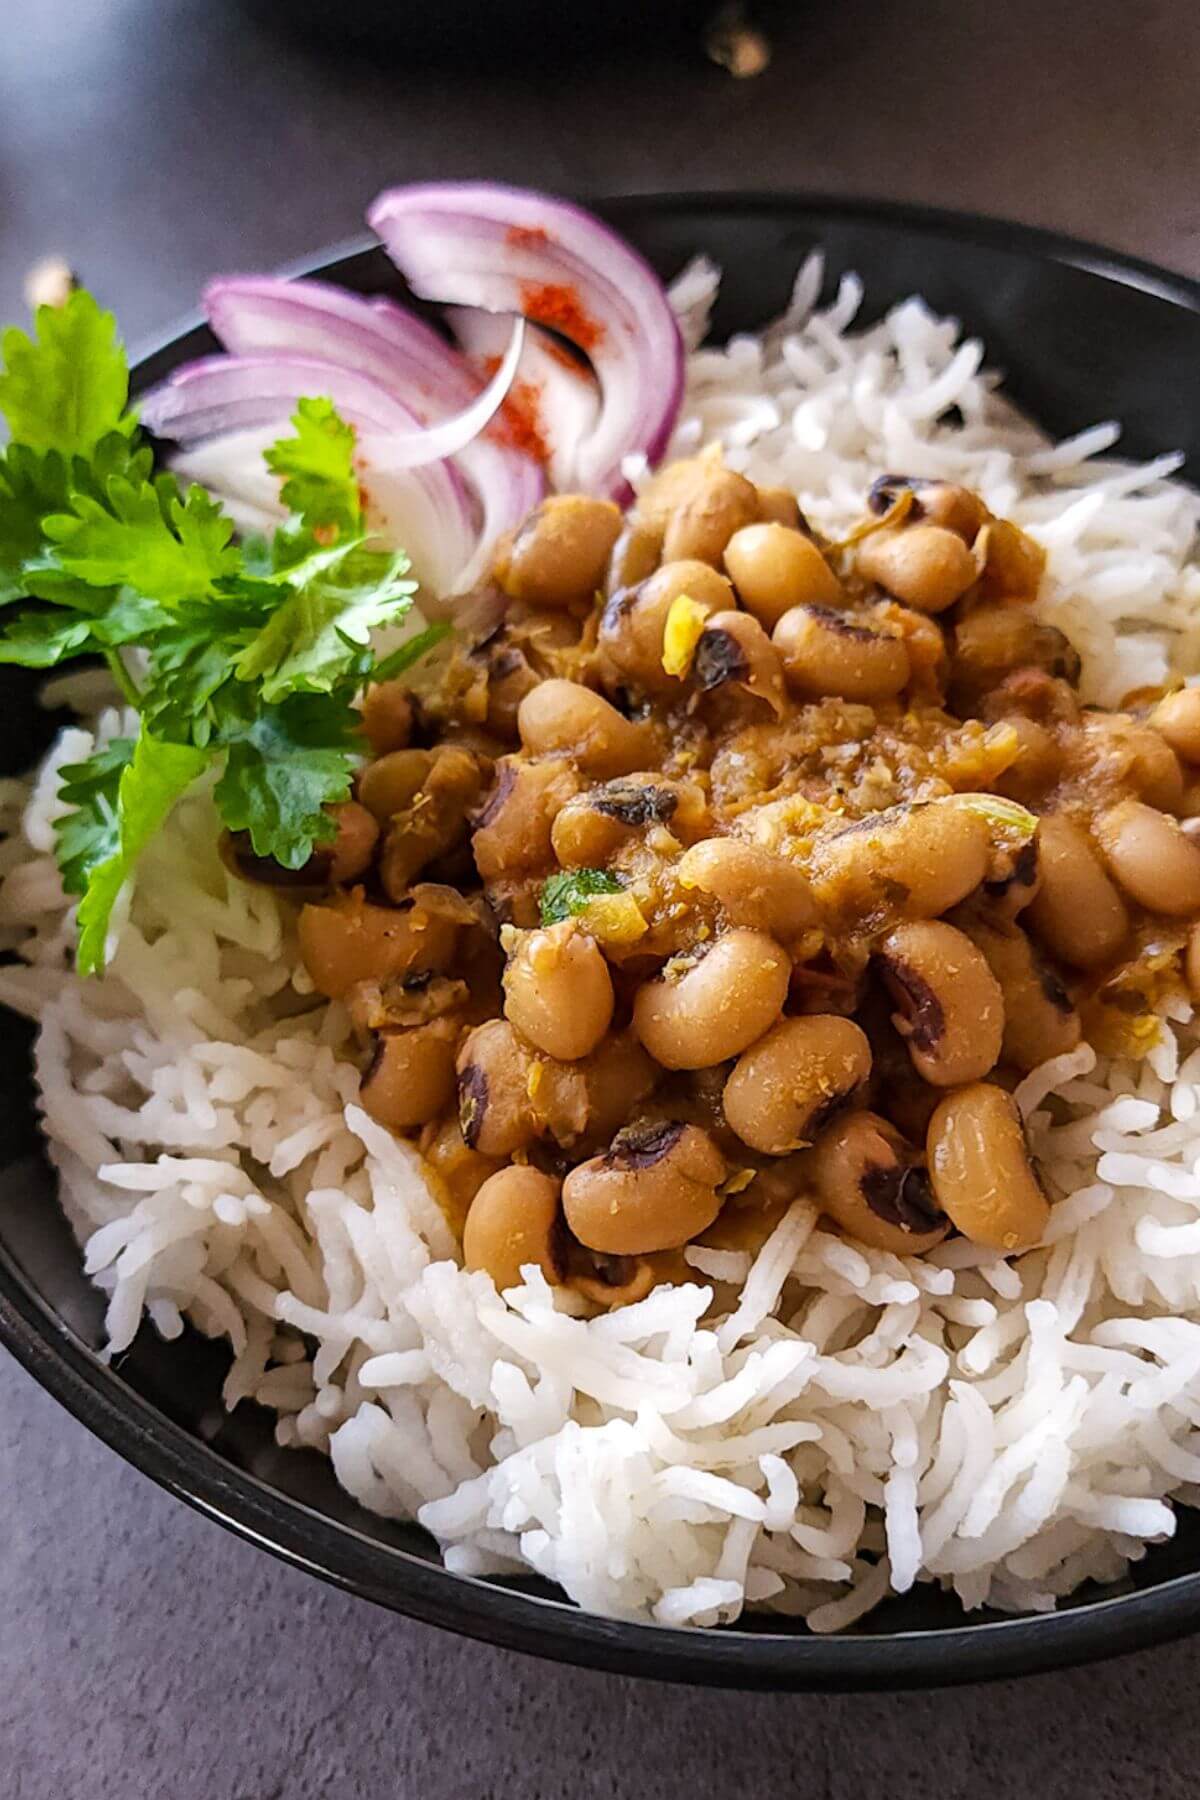 Indian black eyed beans curry, rice, and salad in a bowl.